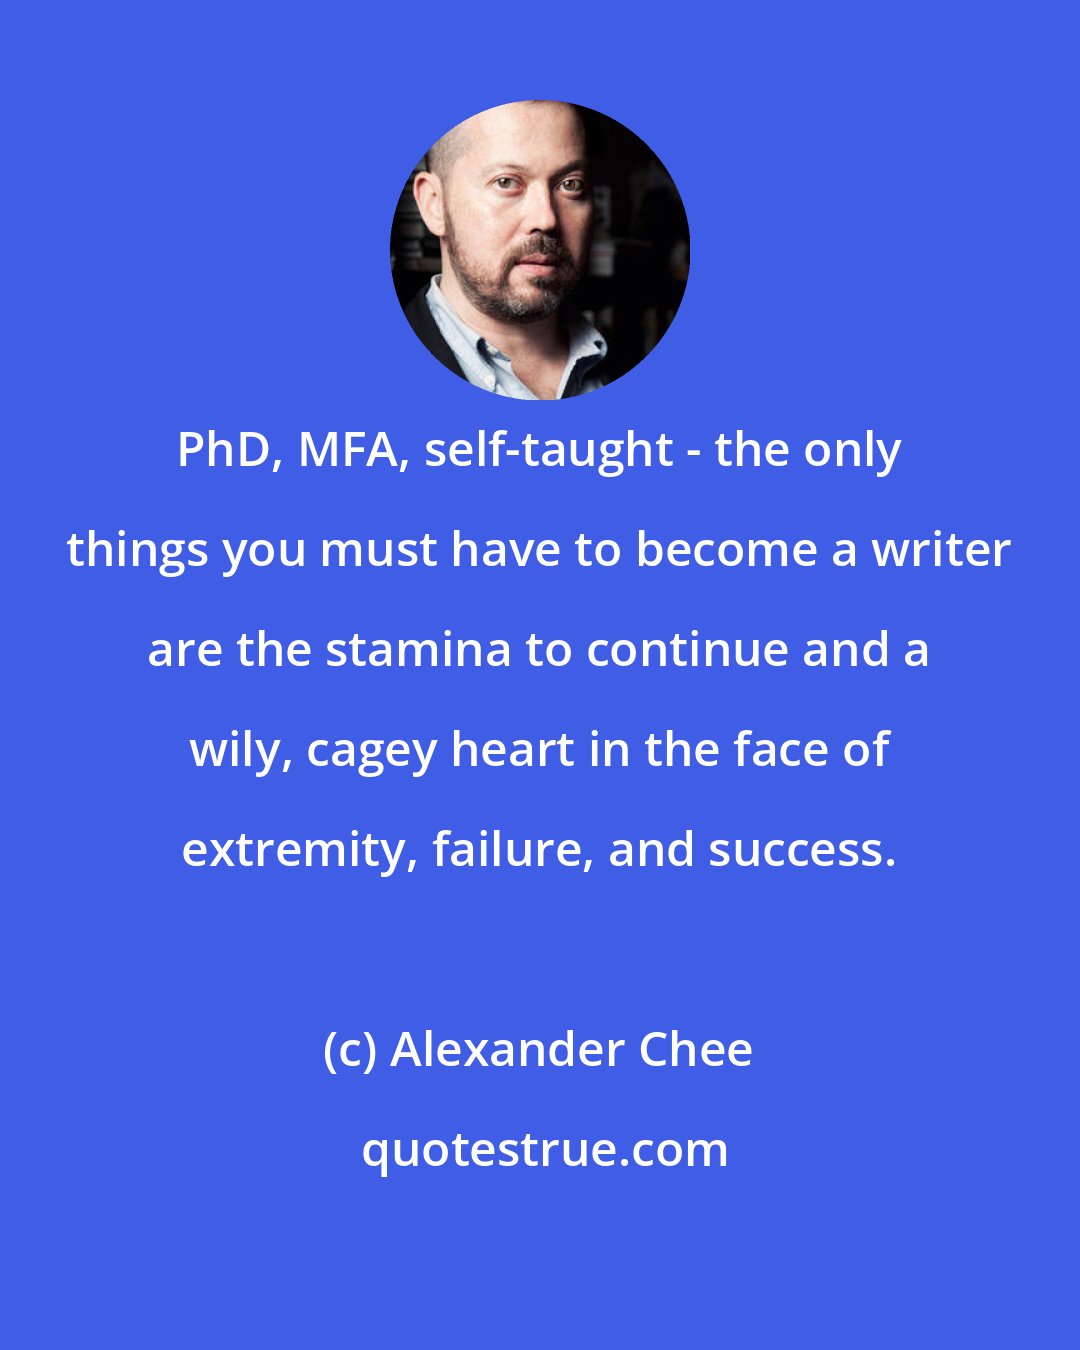 Alexander Chee: PhD, MFA, self-taught - the only things you must have to become a writer are the stamina to continue and a wily, cagey heart in the face of extremity, failure, and success.